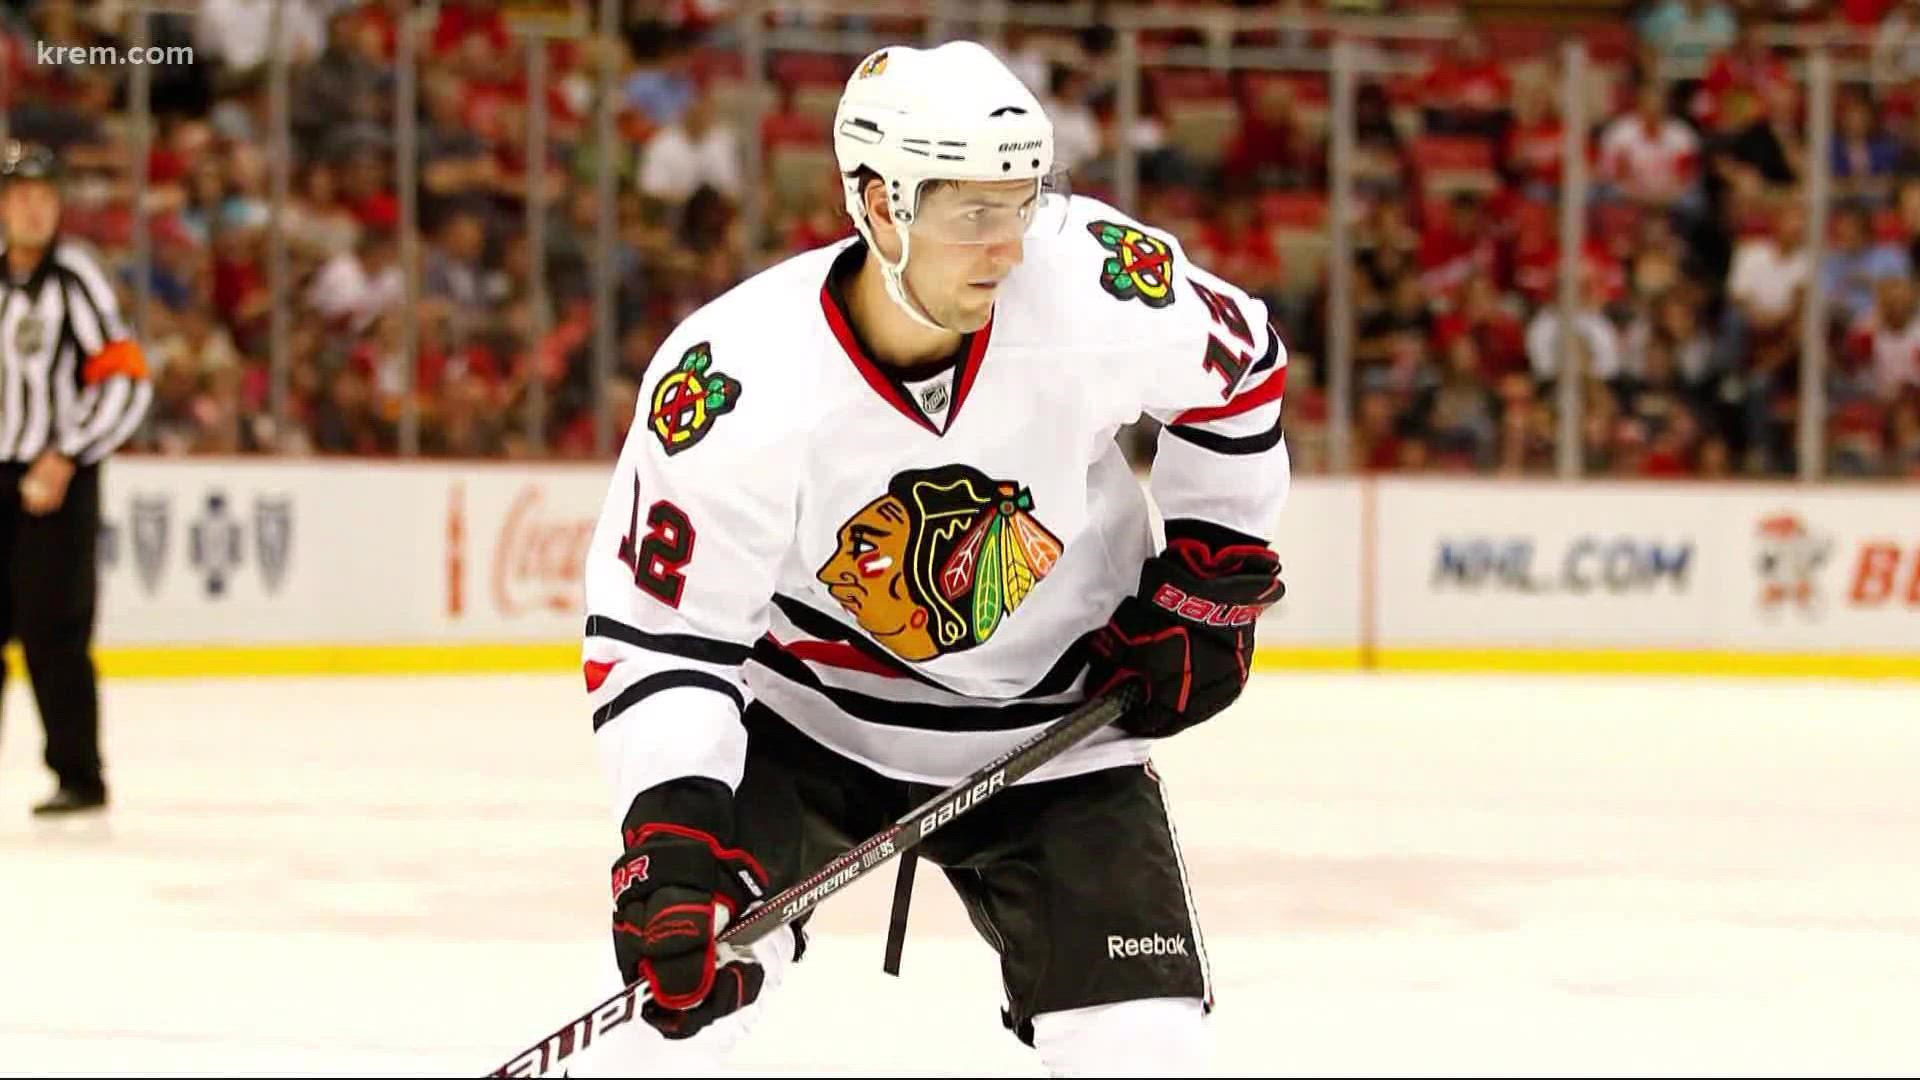 Kyle Beach has revealed himself as the accuser in the Chicago Blackhawks’ sexual assault investigation.